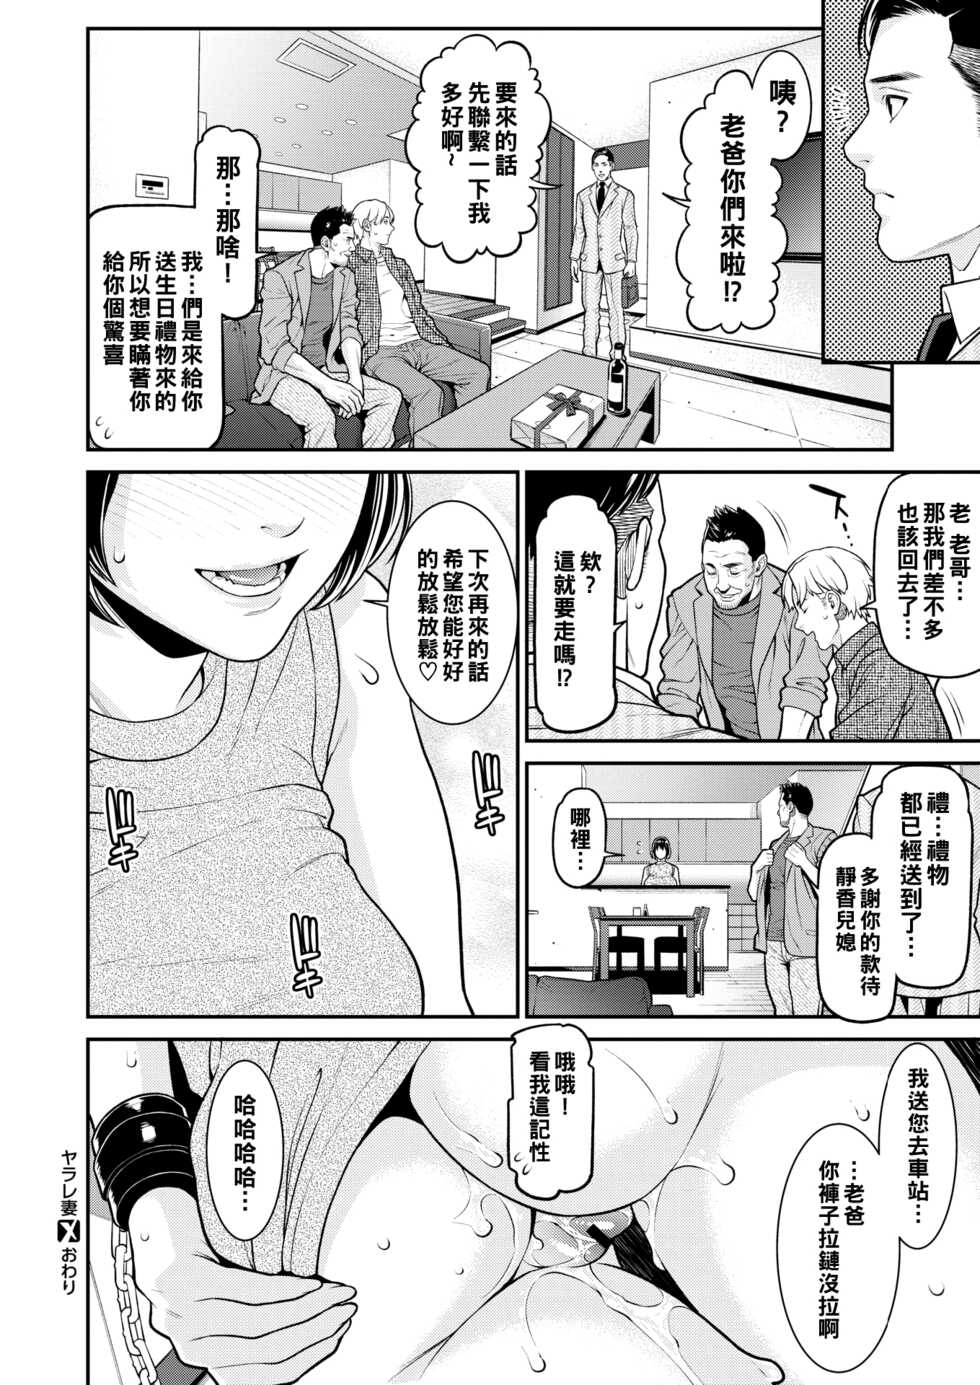 [Syuuen] Yarare Tsuma - Private sex with my wife. (COMIC X-EROS #89) [Chinese] [Digital] - Page 10